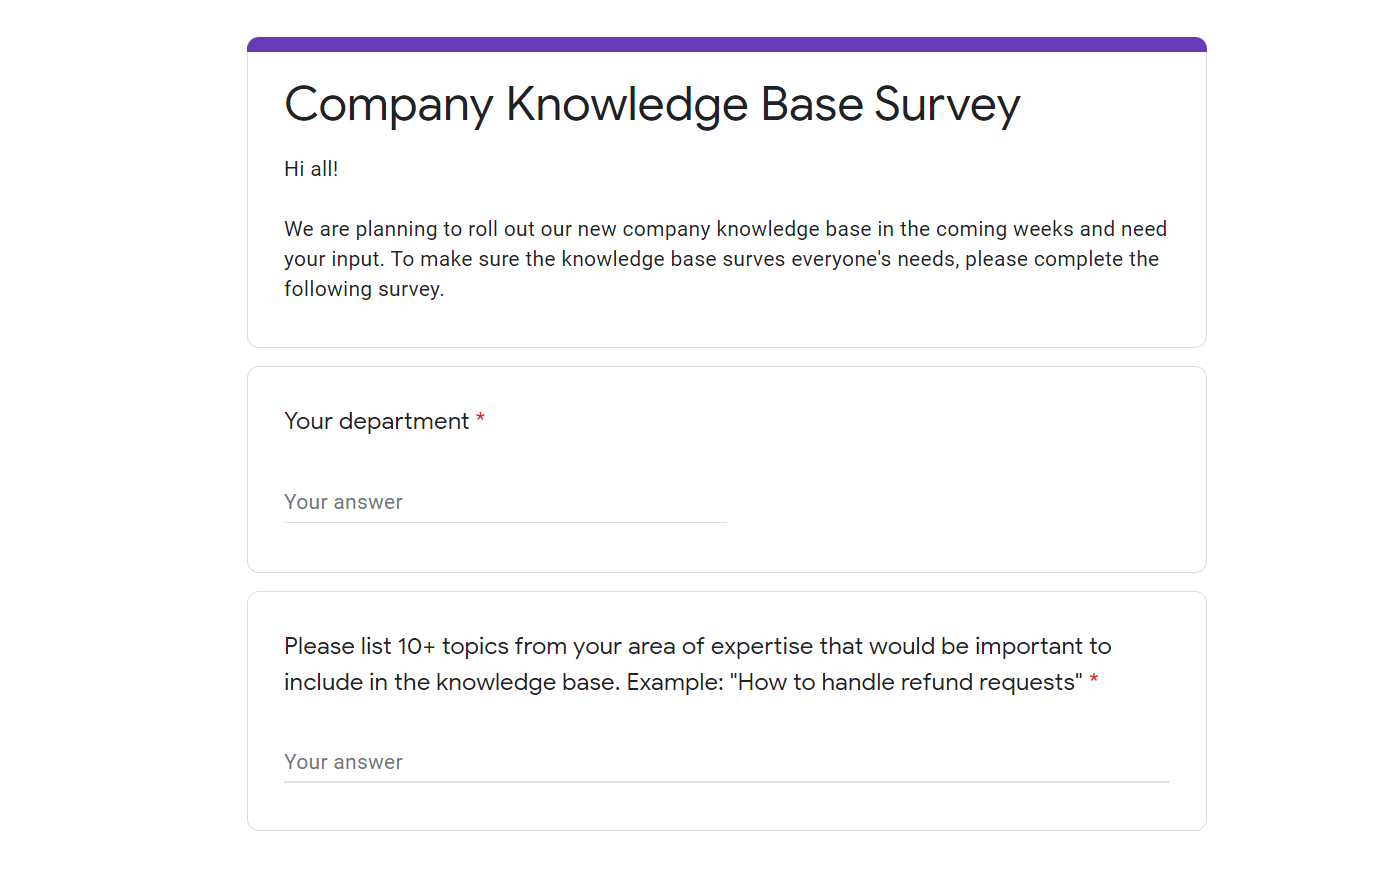 Company knowledge base what to include